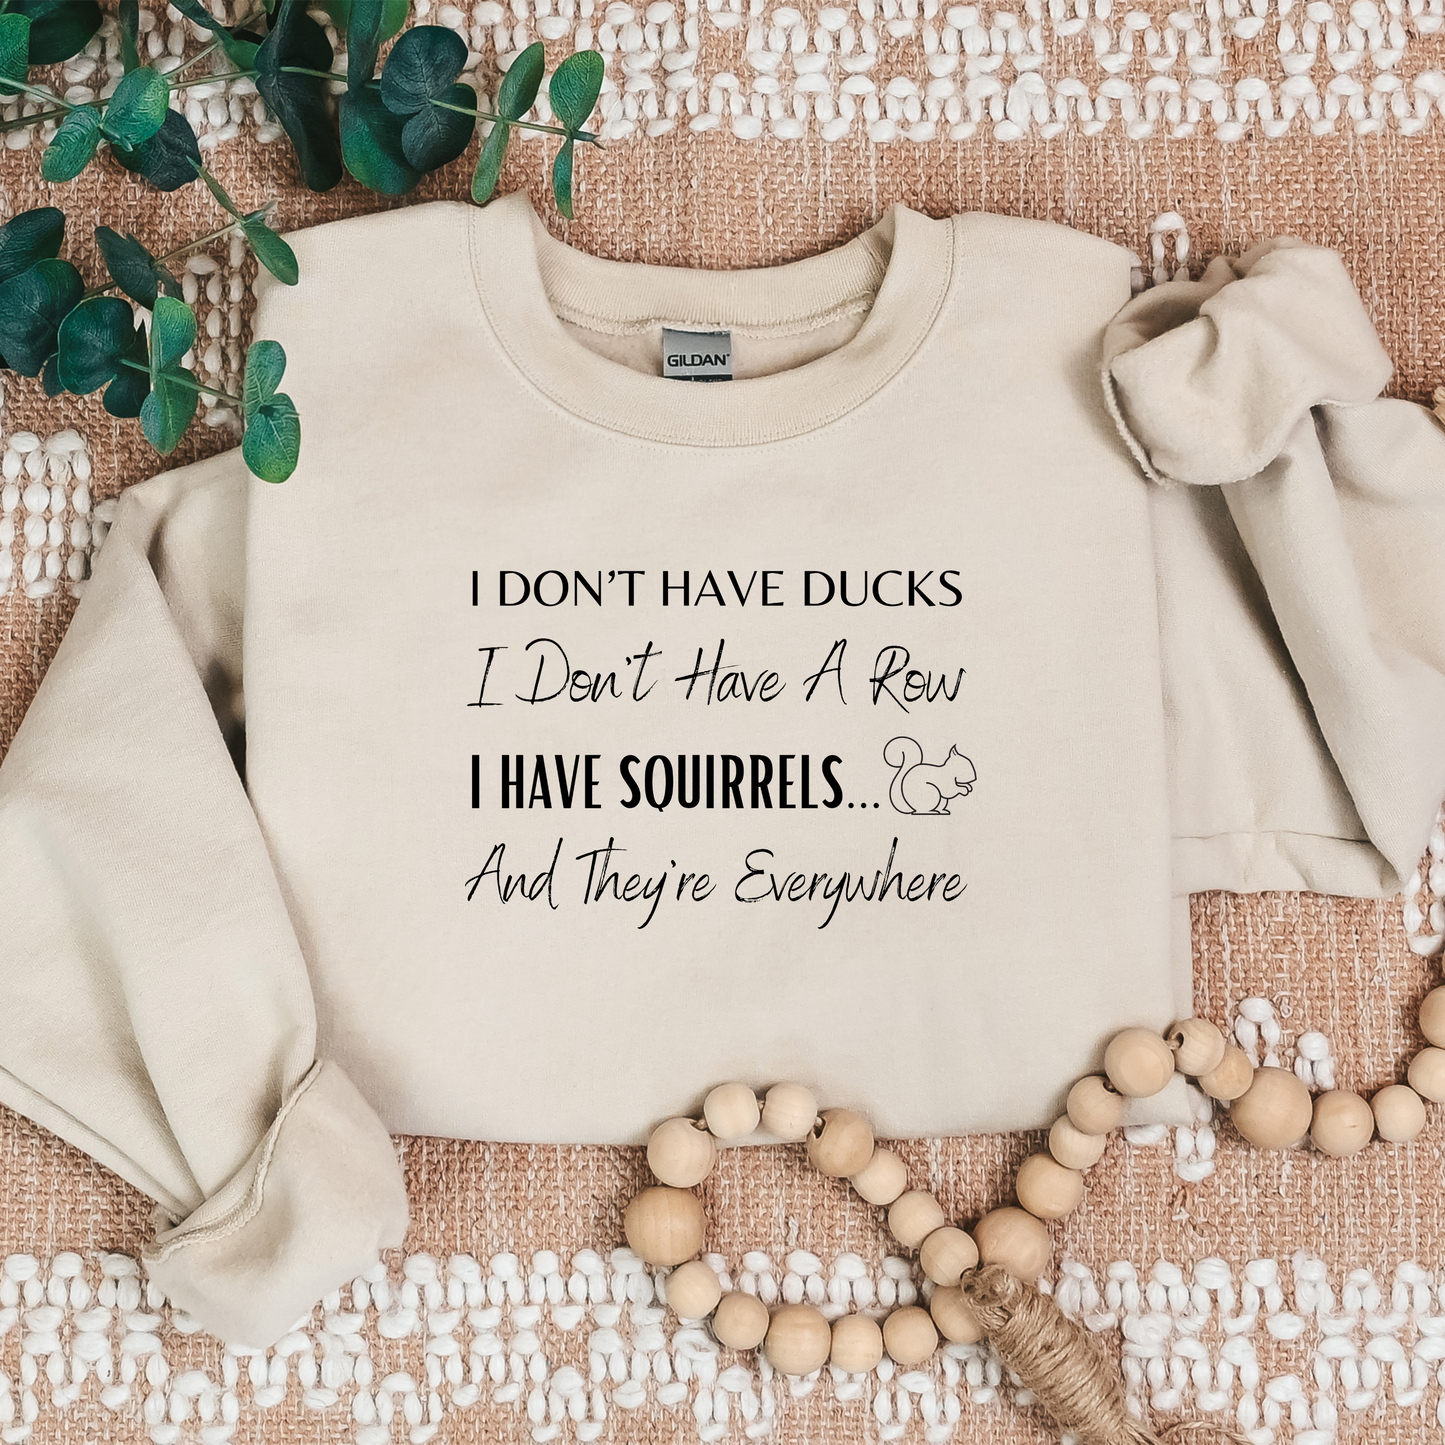 Cozy, Stylish, and Sarcastic Sweatshirt - I Have Squirrels And They’re Everywhere